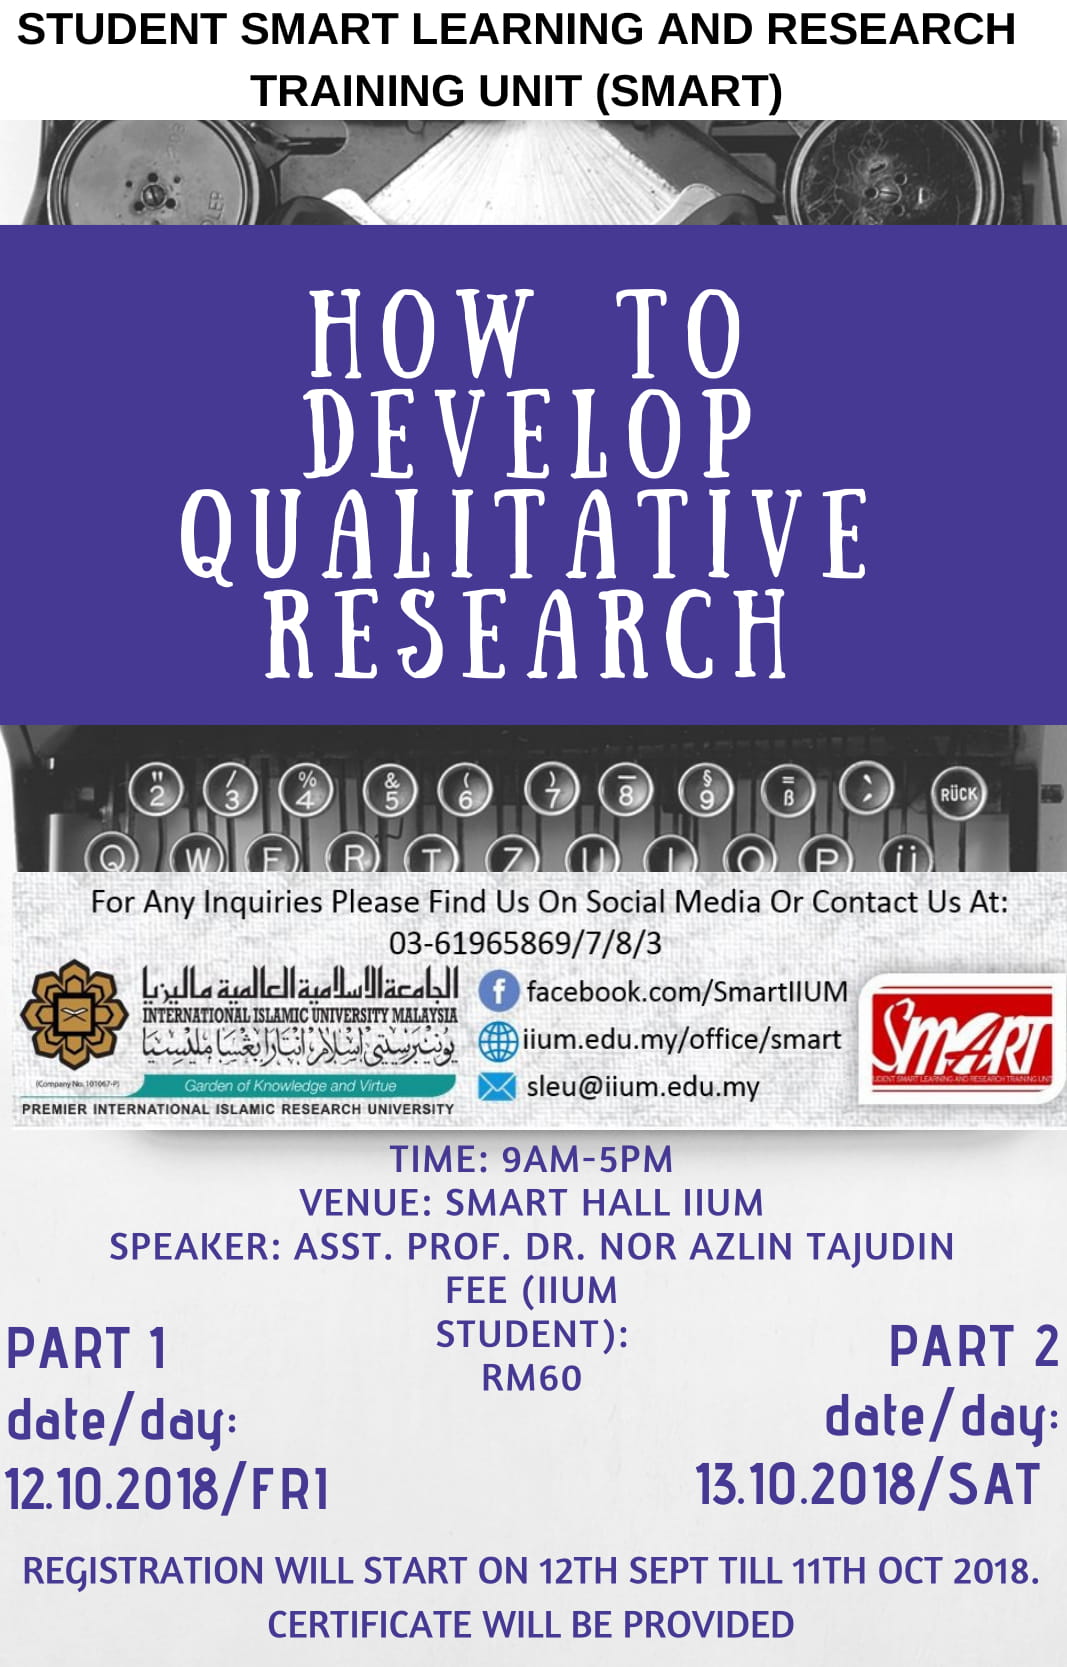 WORKSHOP : HOW TO DEVELOP QUALITATIVE RESEARCH